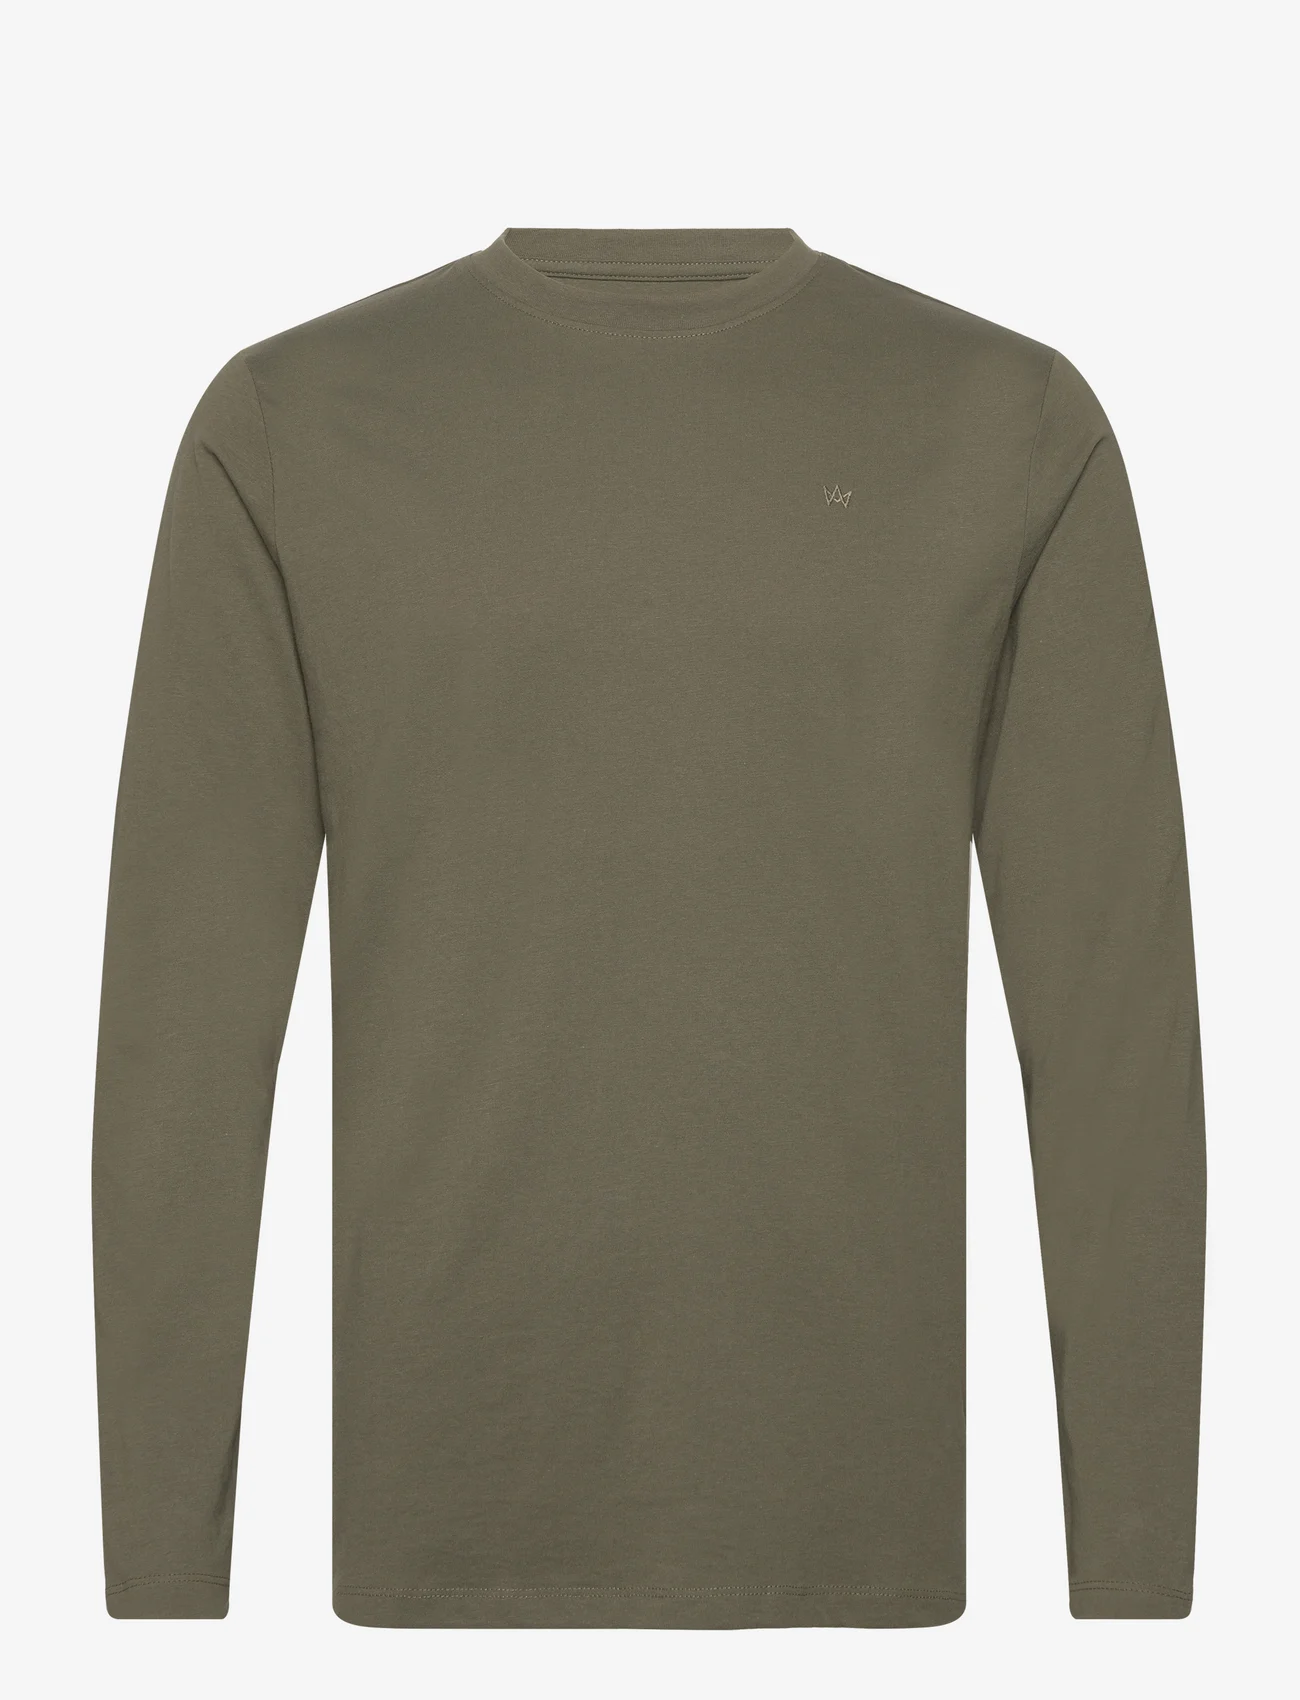 Kronstadt - Timmi Organic Recycle L/S tee - lowest prices - army - 0